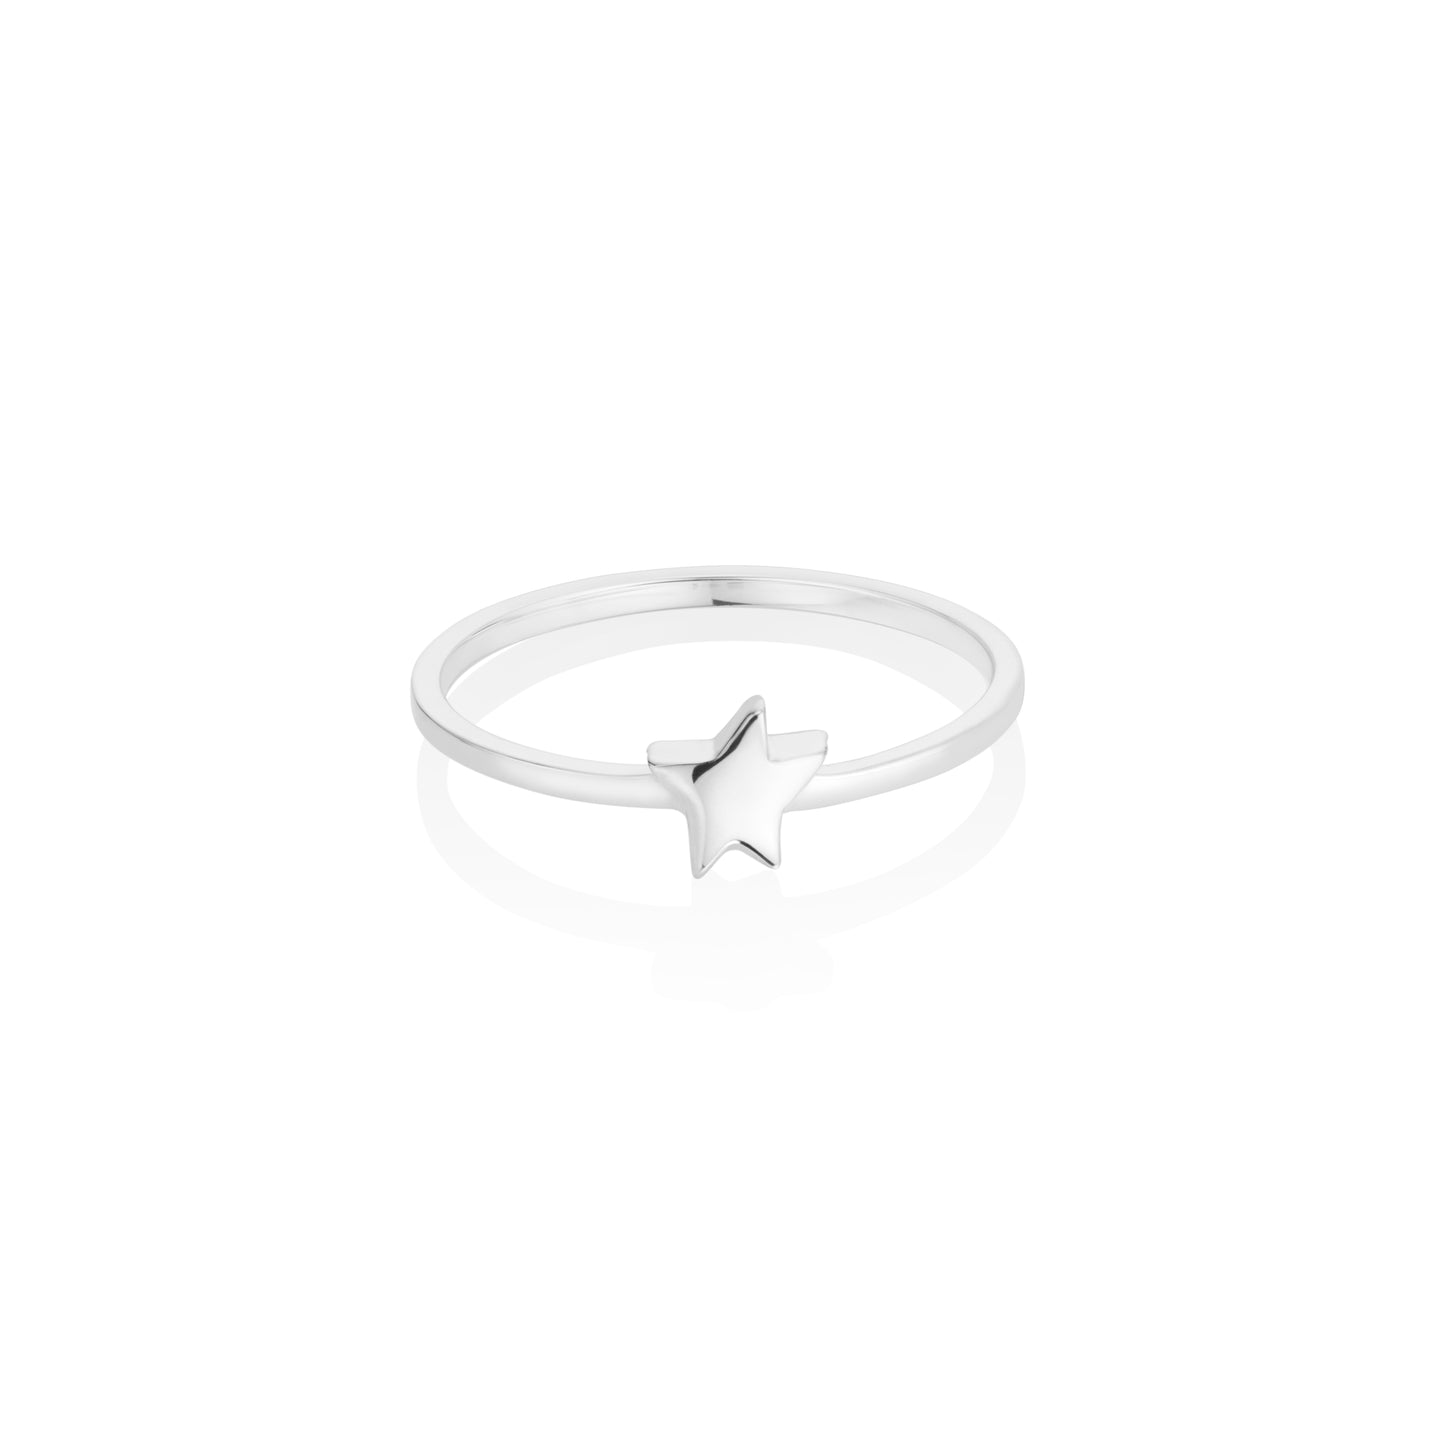 Étoile Mini Star Ring from Serena Van Rensselaer x Le Petit Prince© Collection